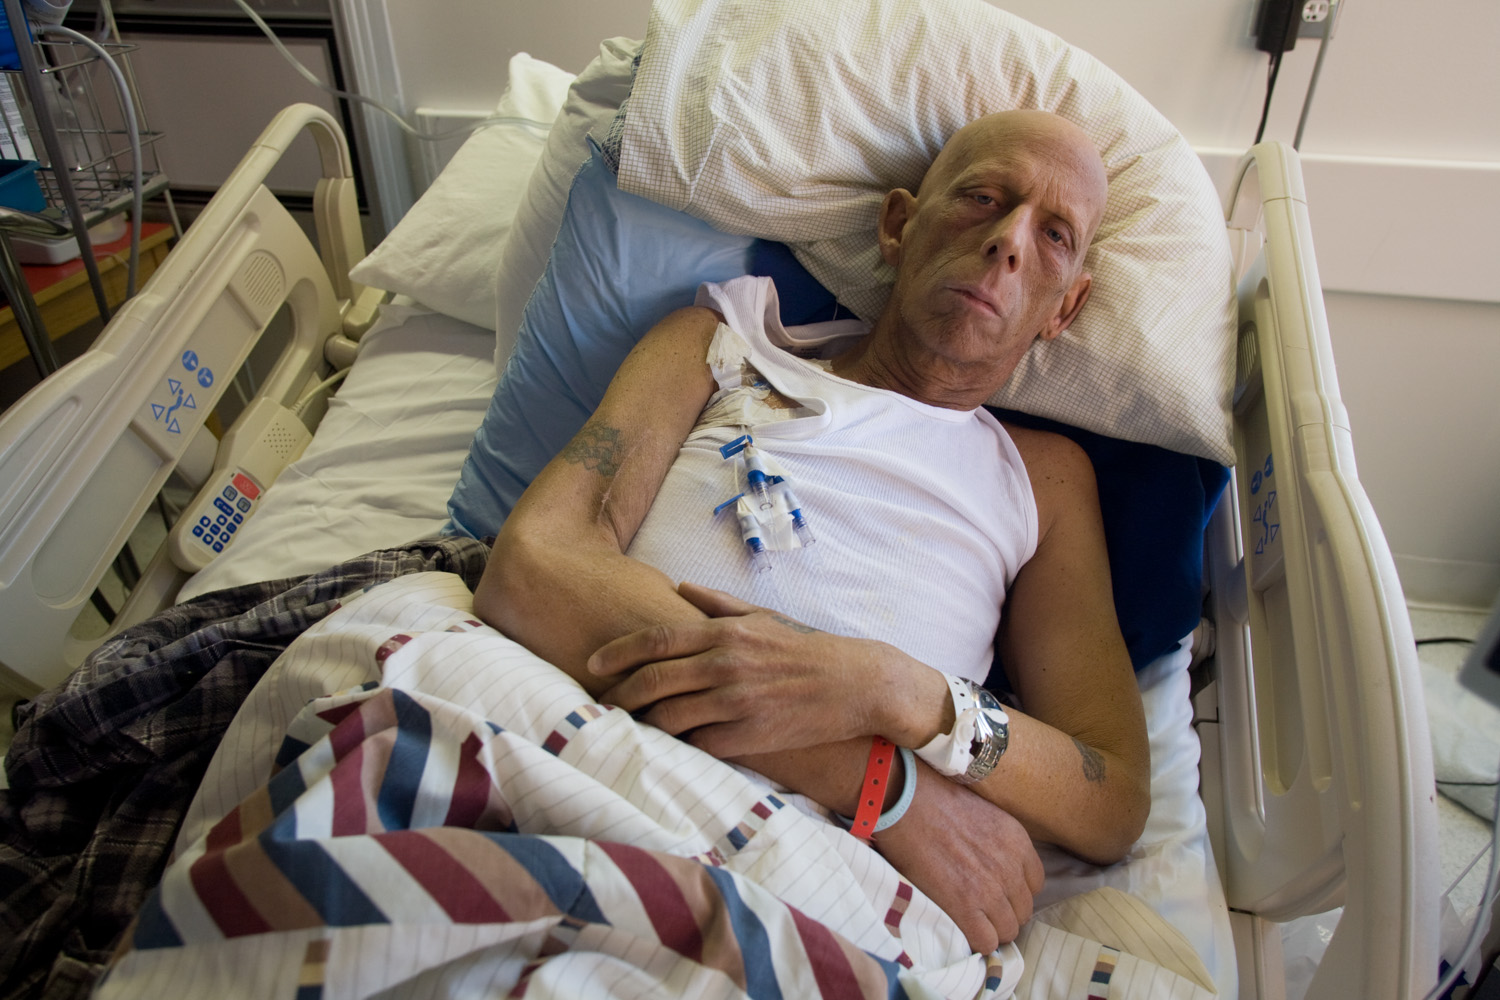 9/11 health impact - 9/11: Still killing - Pictures - CBS News